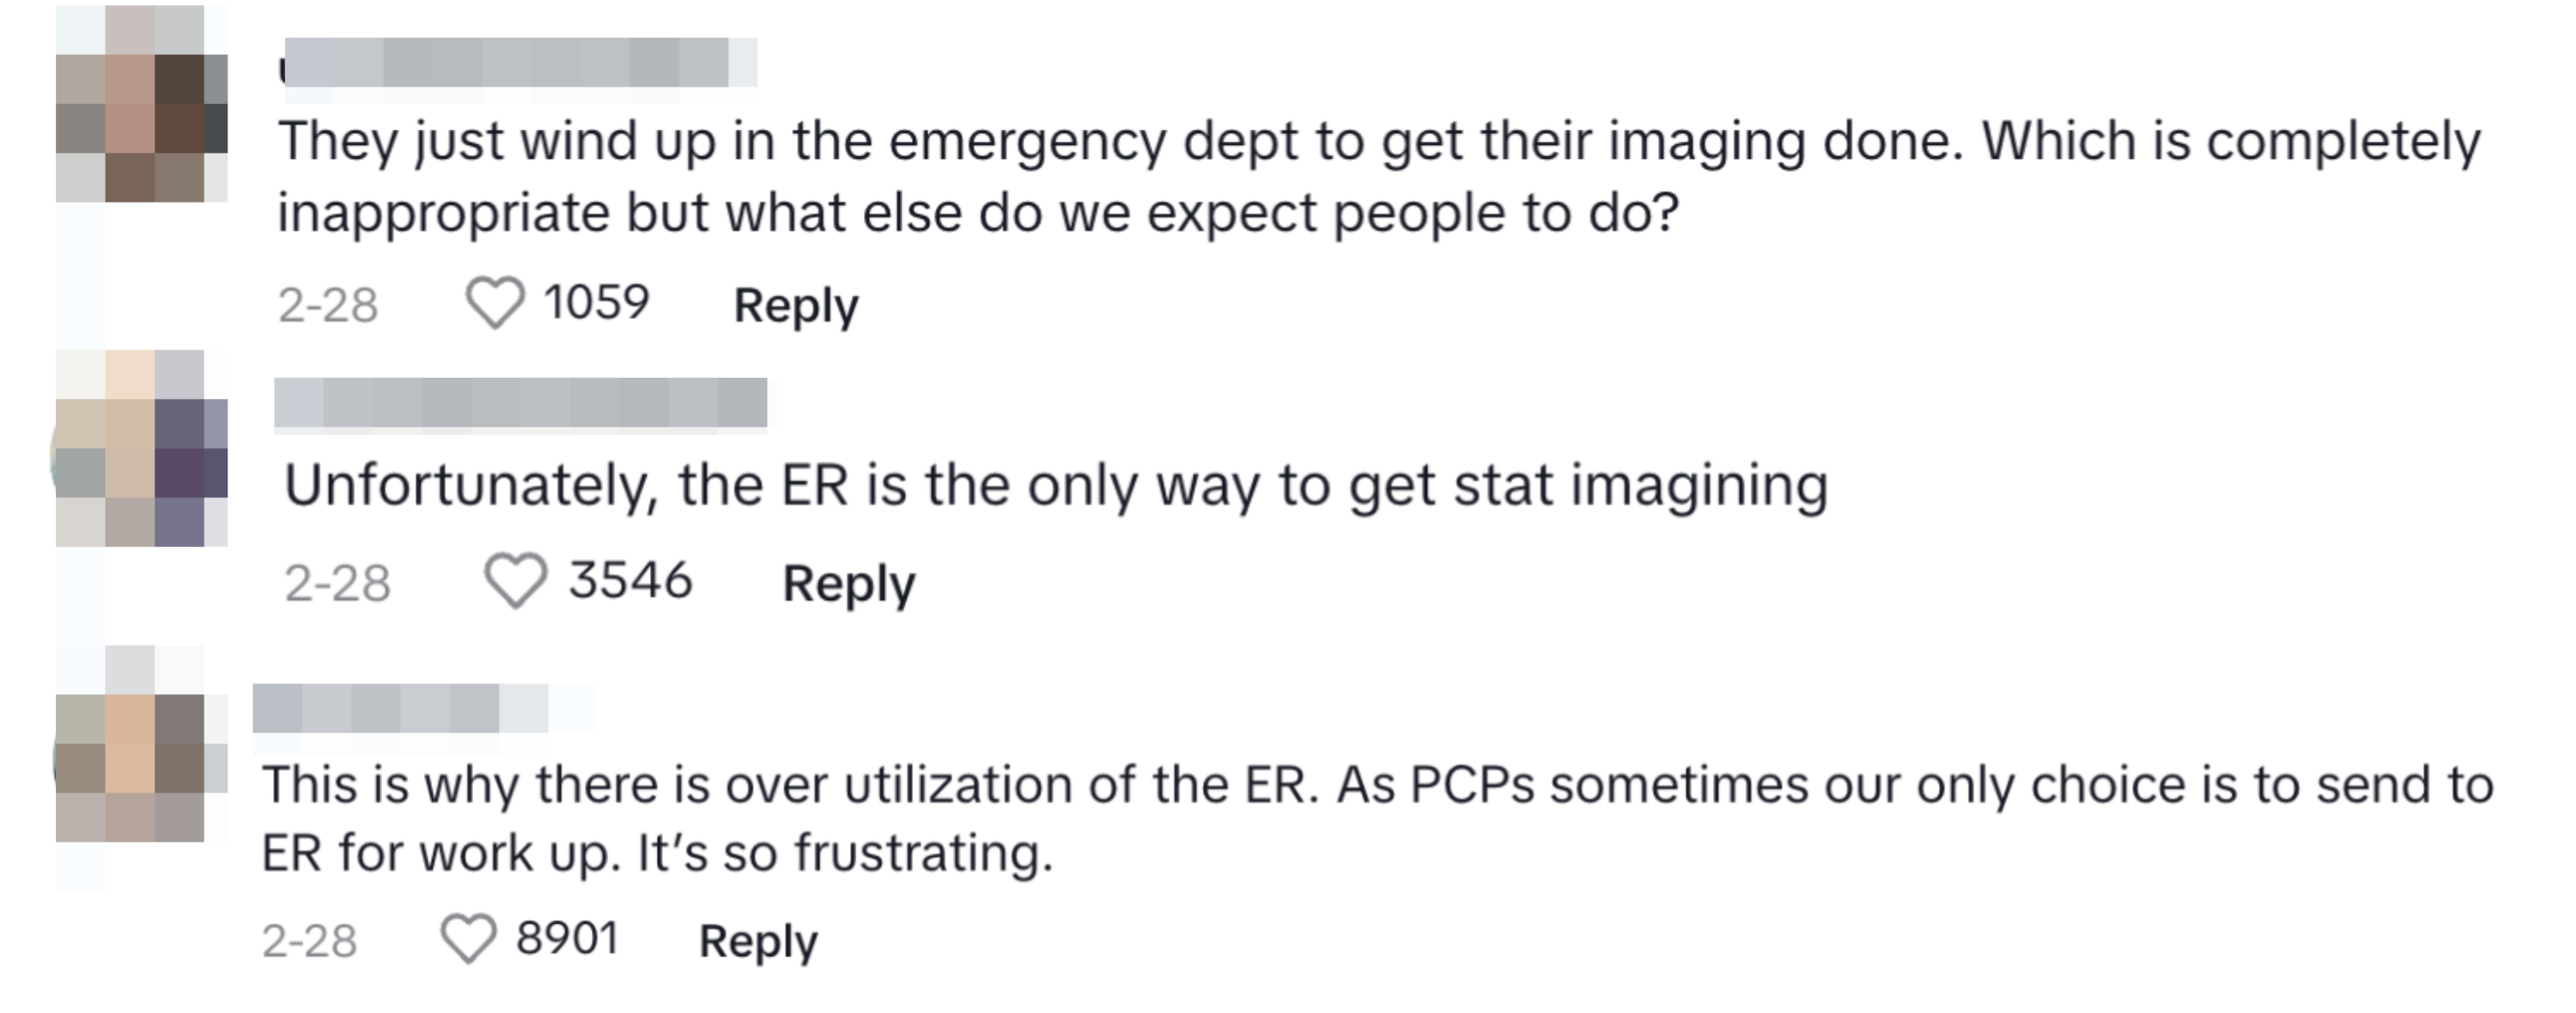 Comment thread on a post discussing emergency room utilization for imaging services, with users sharing frustrations about healthcare system constraints